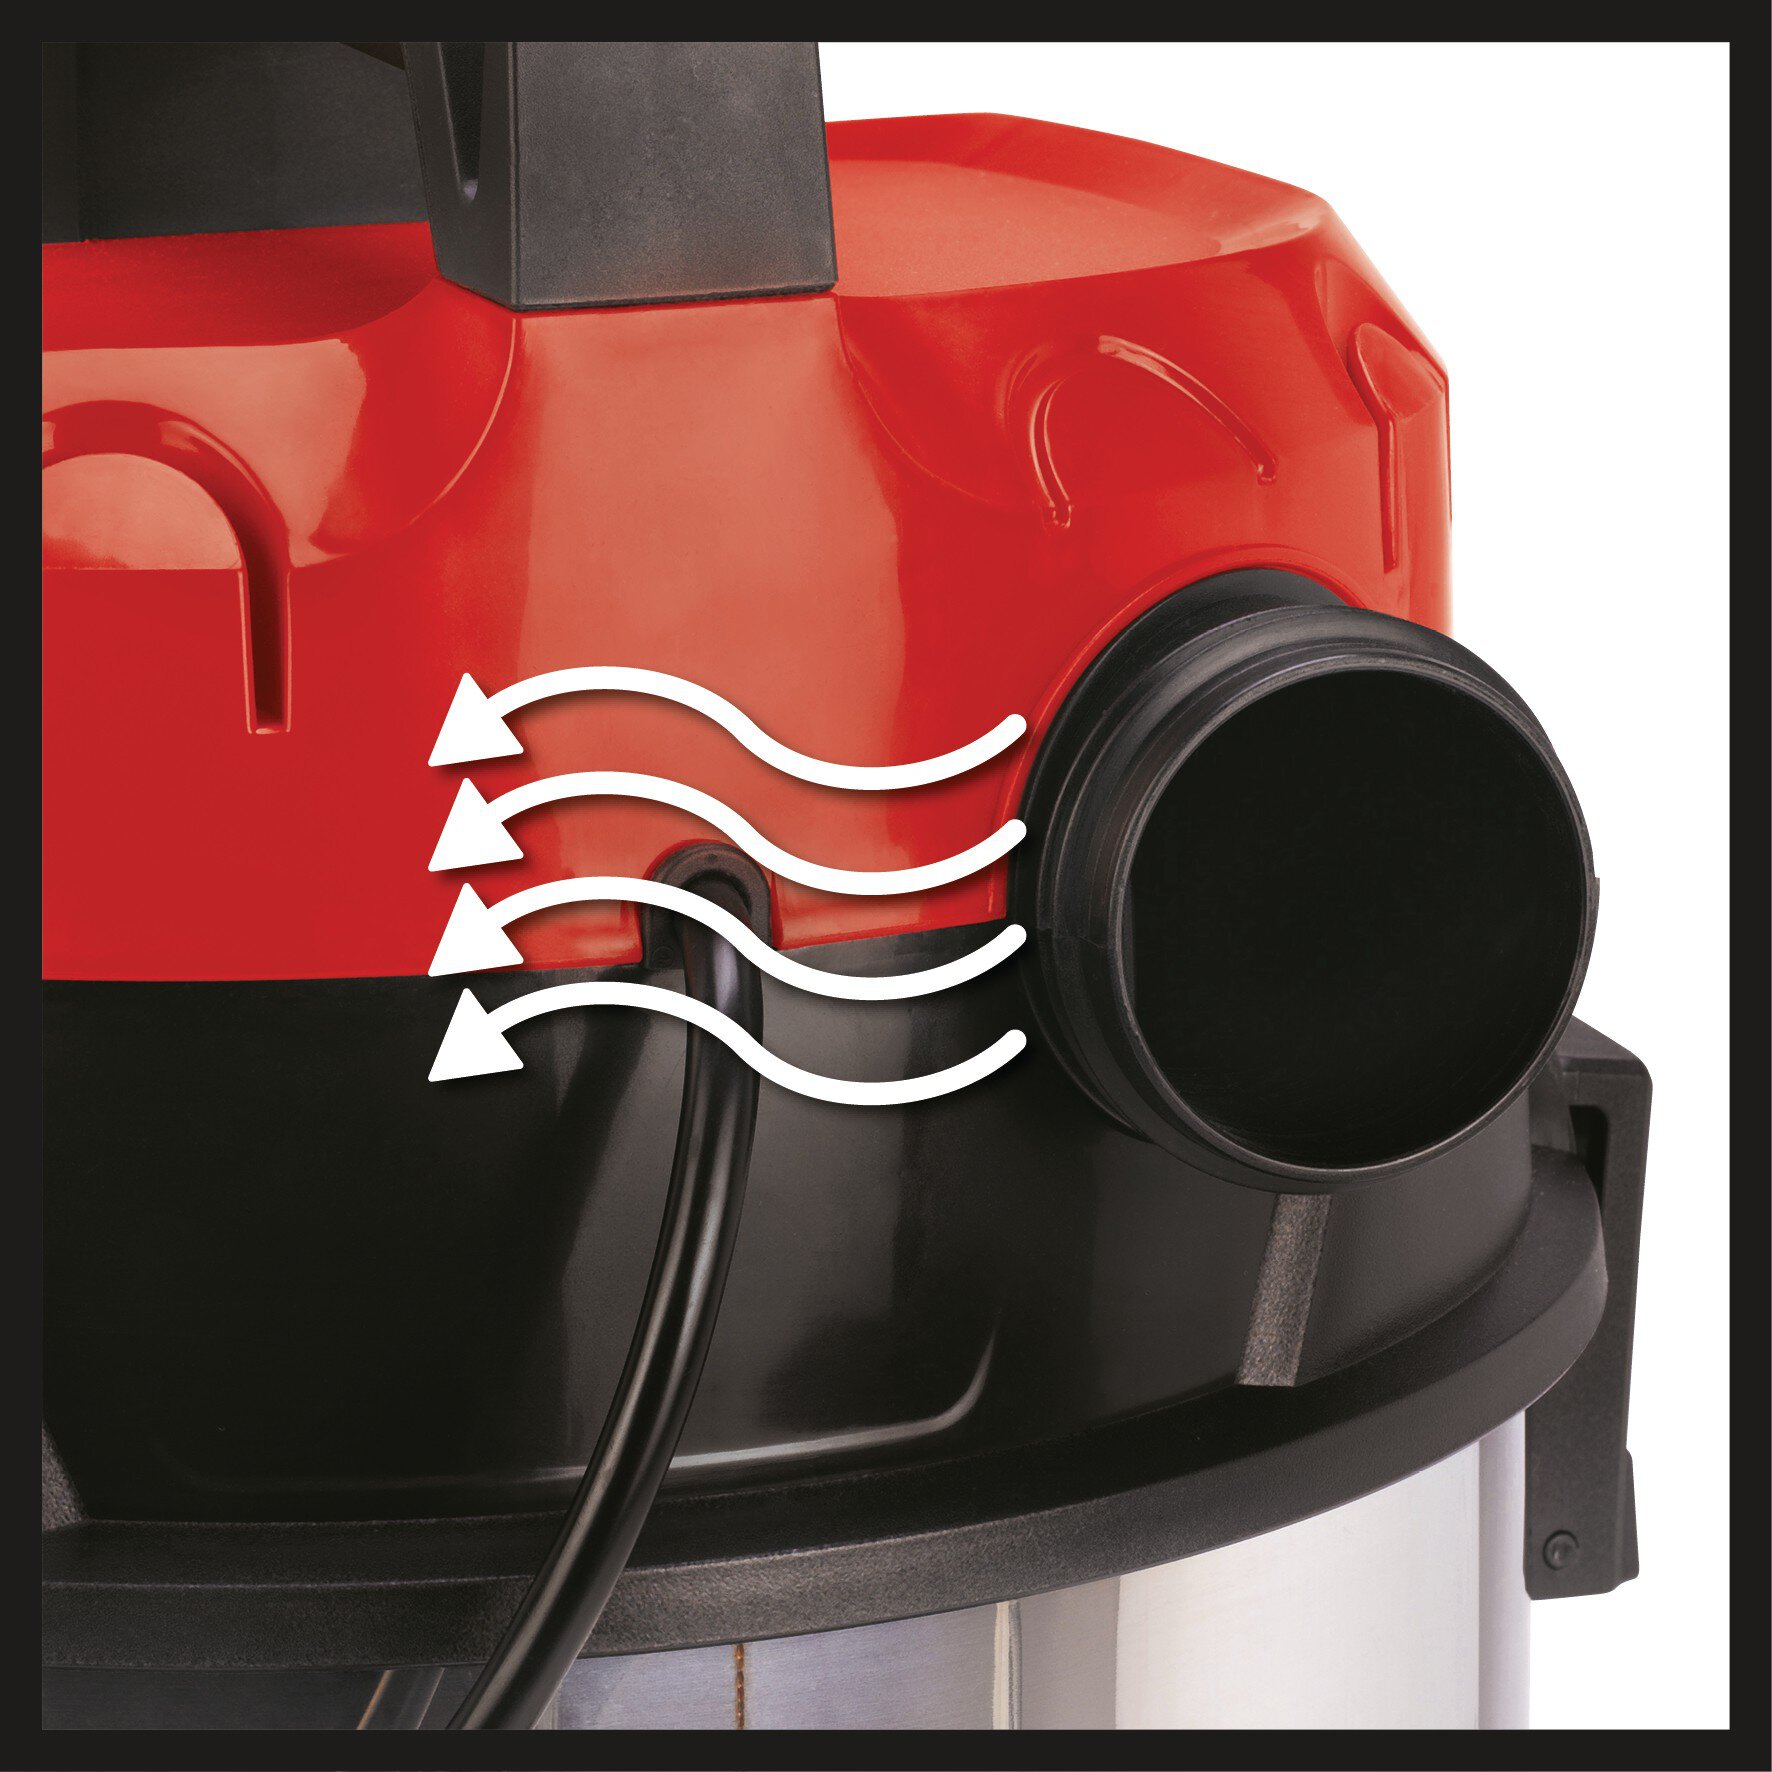 einhell-expert-wet-dry-vacuum-cleaner-elect-2342363-detail_image-003